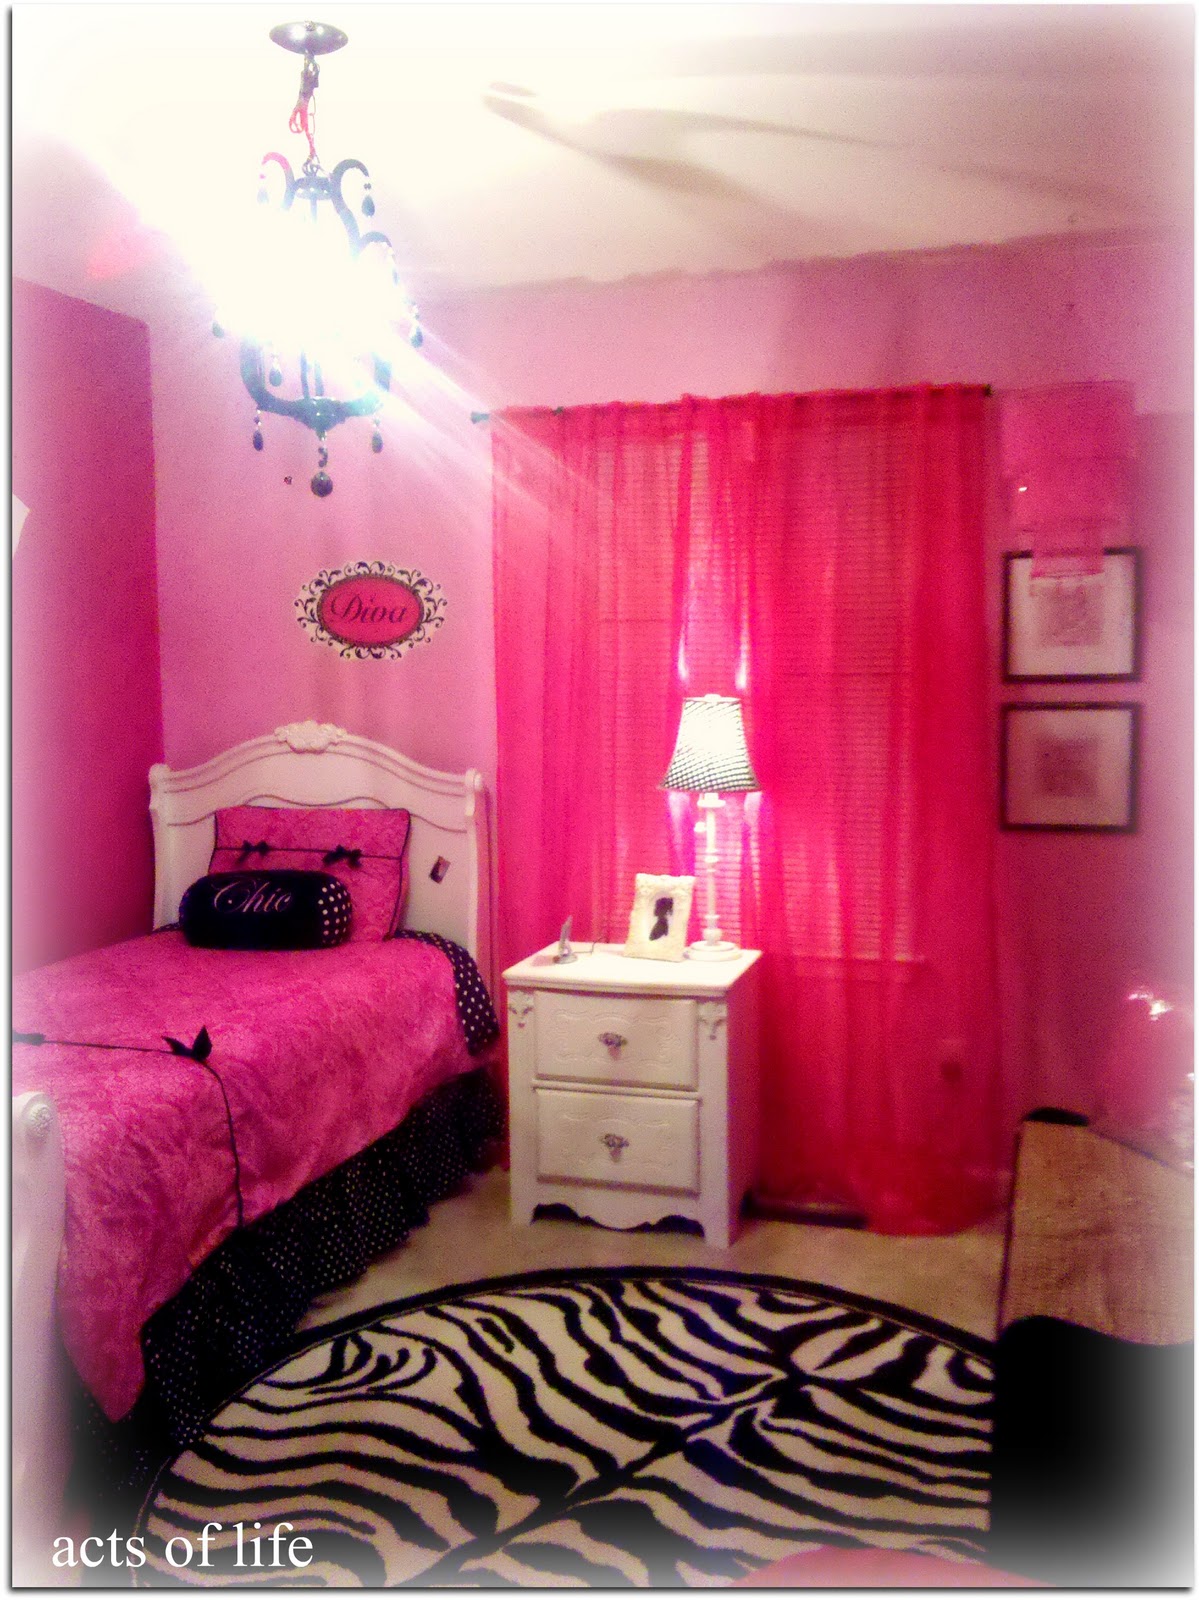 Acts of Life Hot pink Bedroom  My daughters bedroom  project